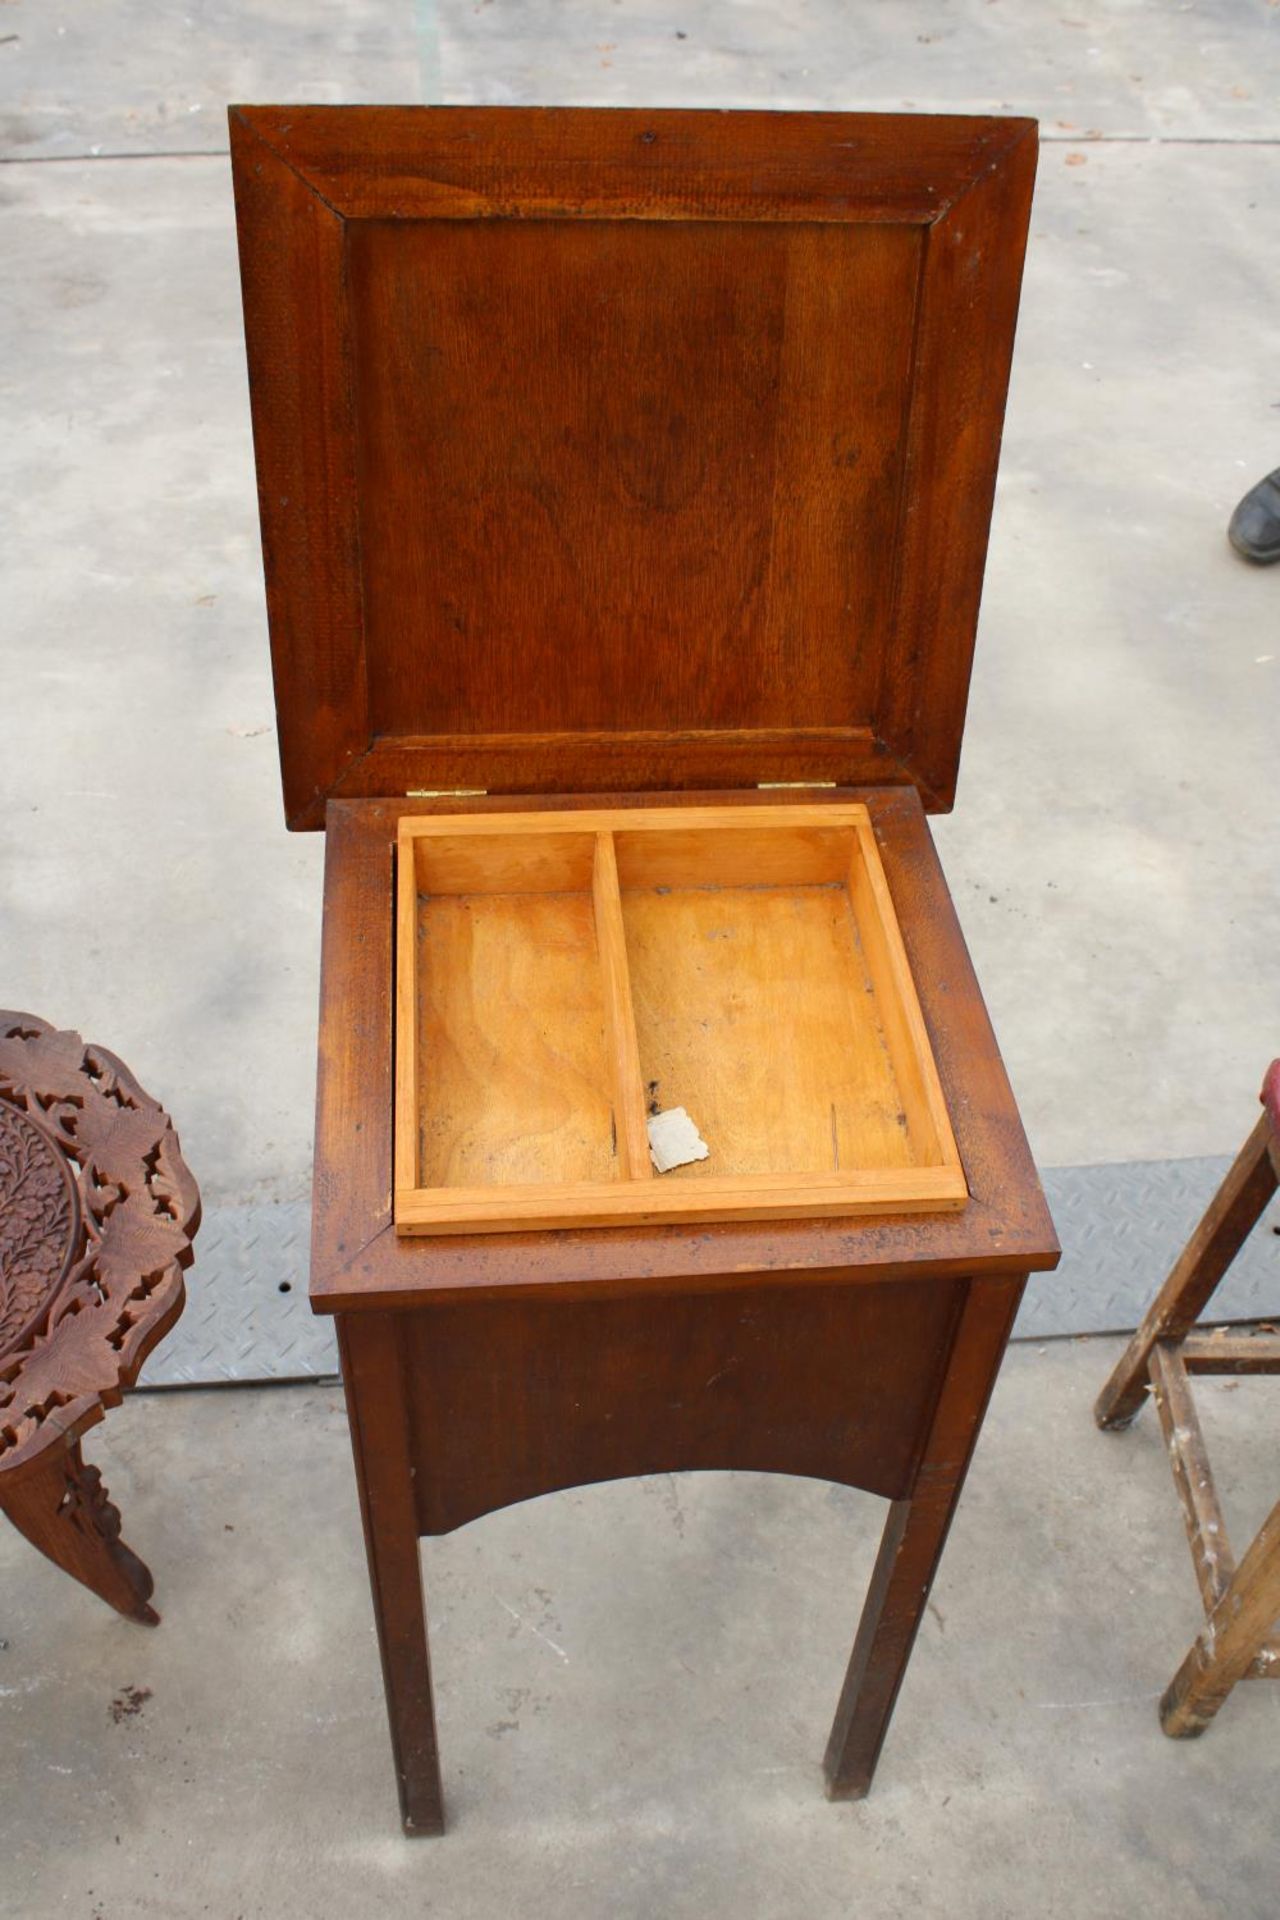 A MID 20TH CENTURY WORK BOX/TABLE - Image 2 of 3